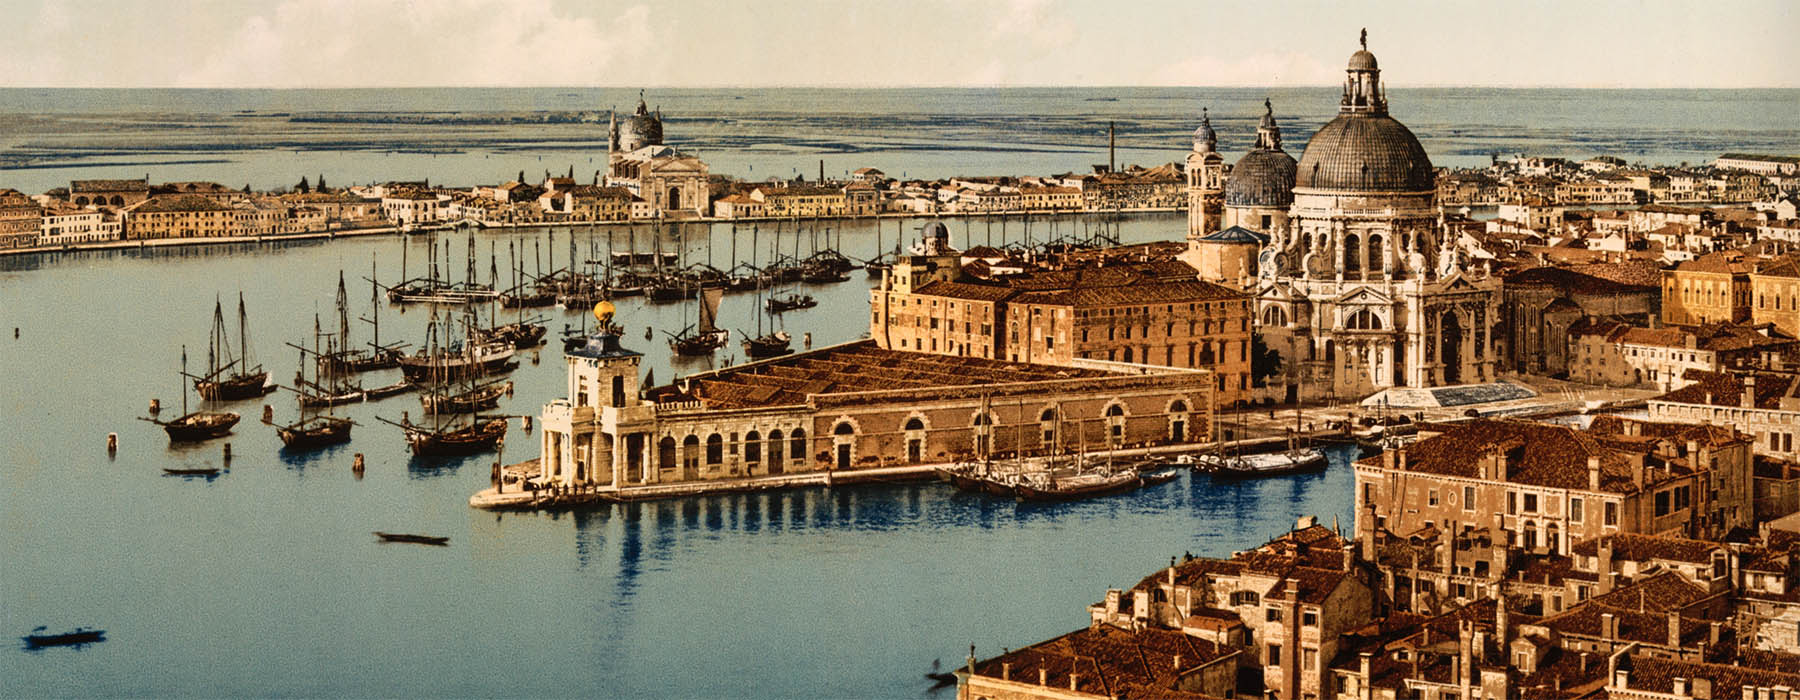 Arial view of Venice